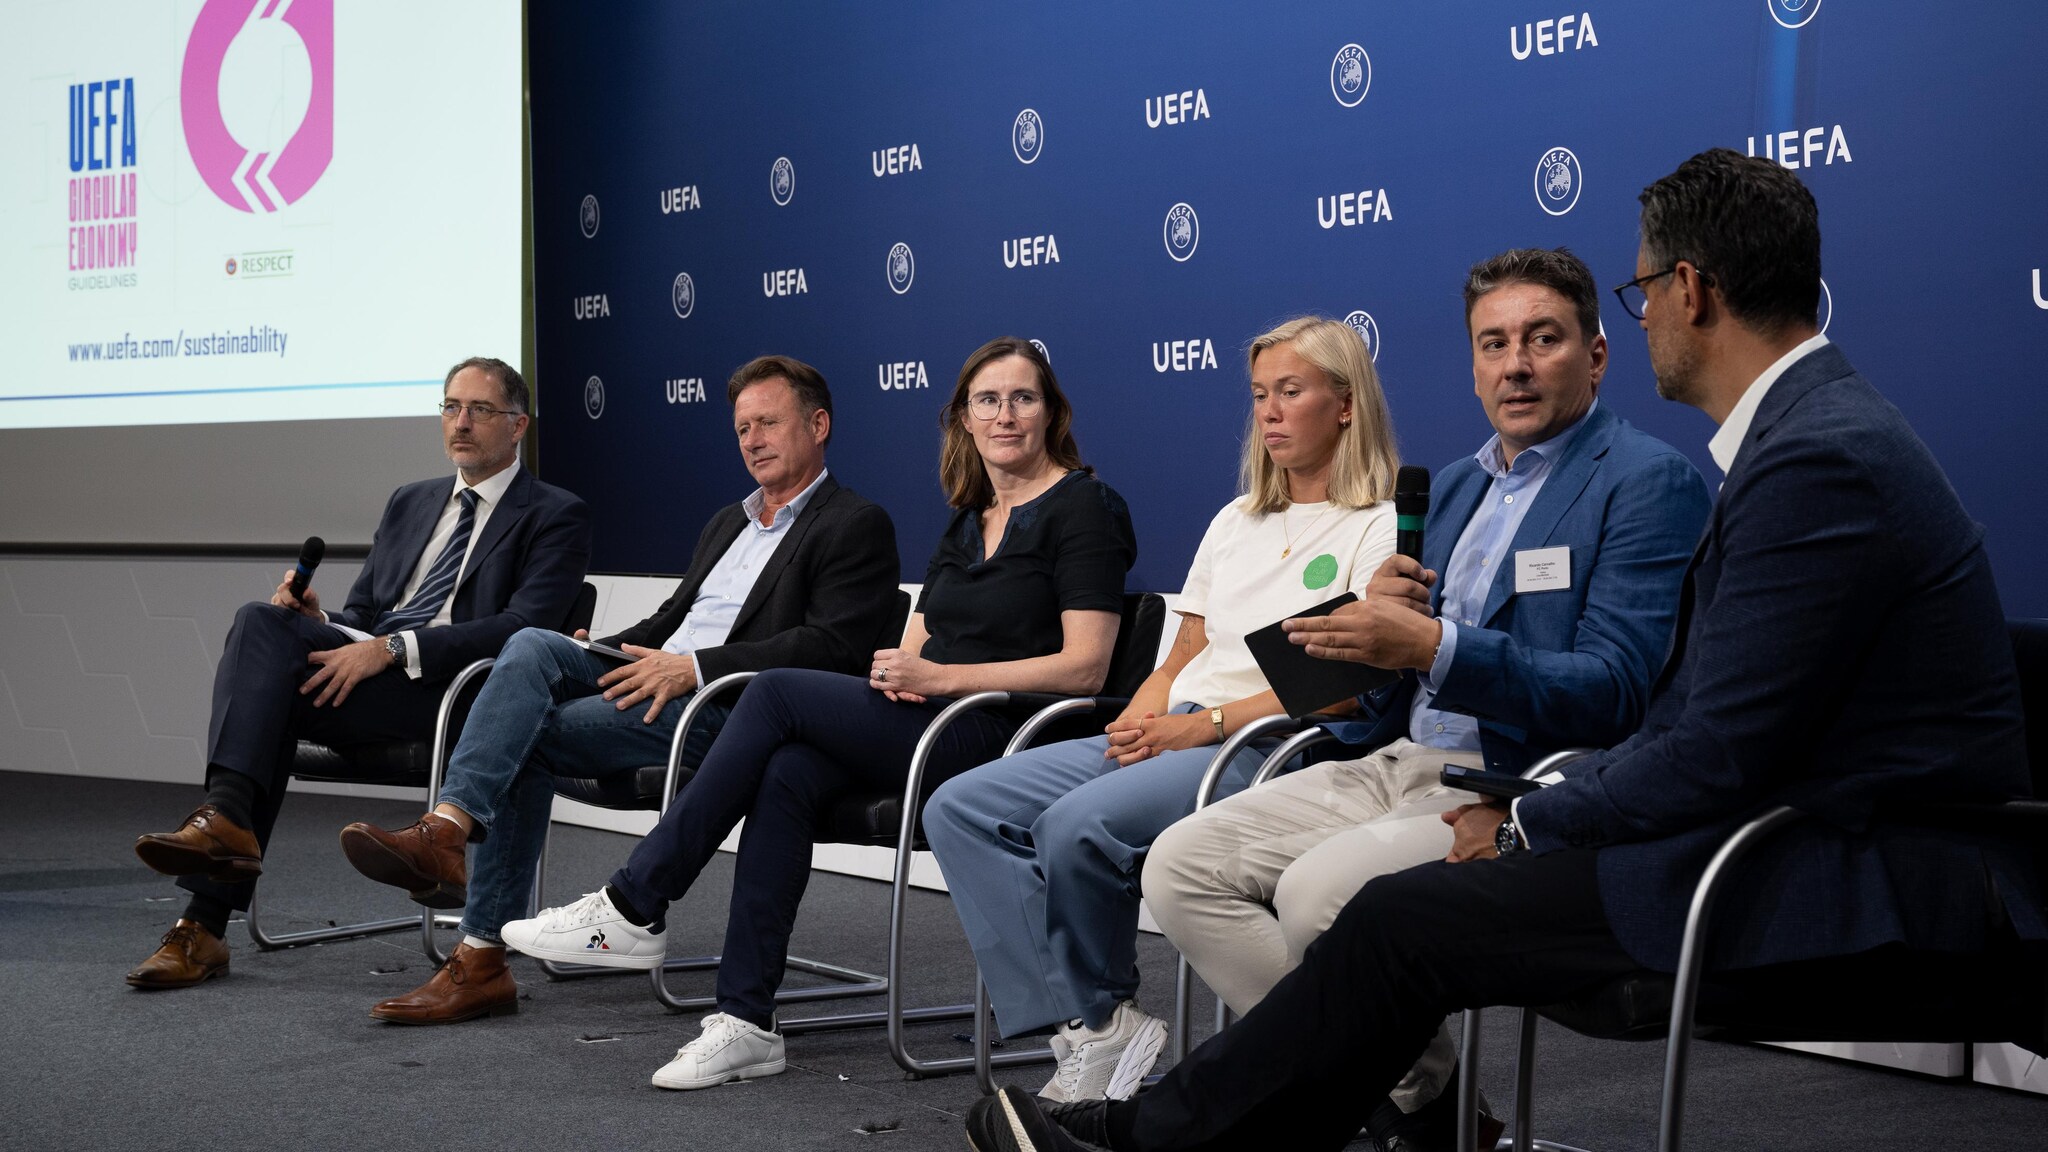 Danish Football Association and FC Porto present at UEFA’s launch of its Circular Economy Guidelines